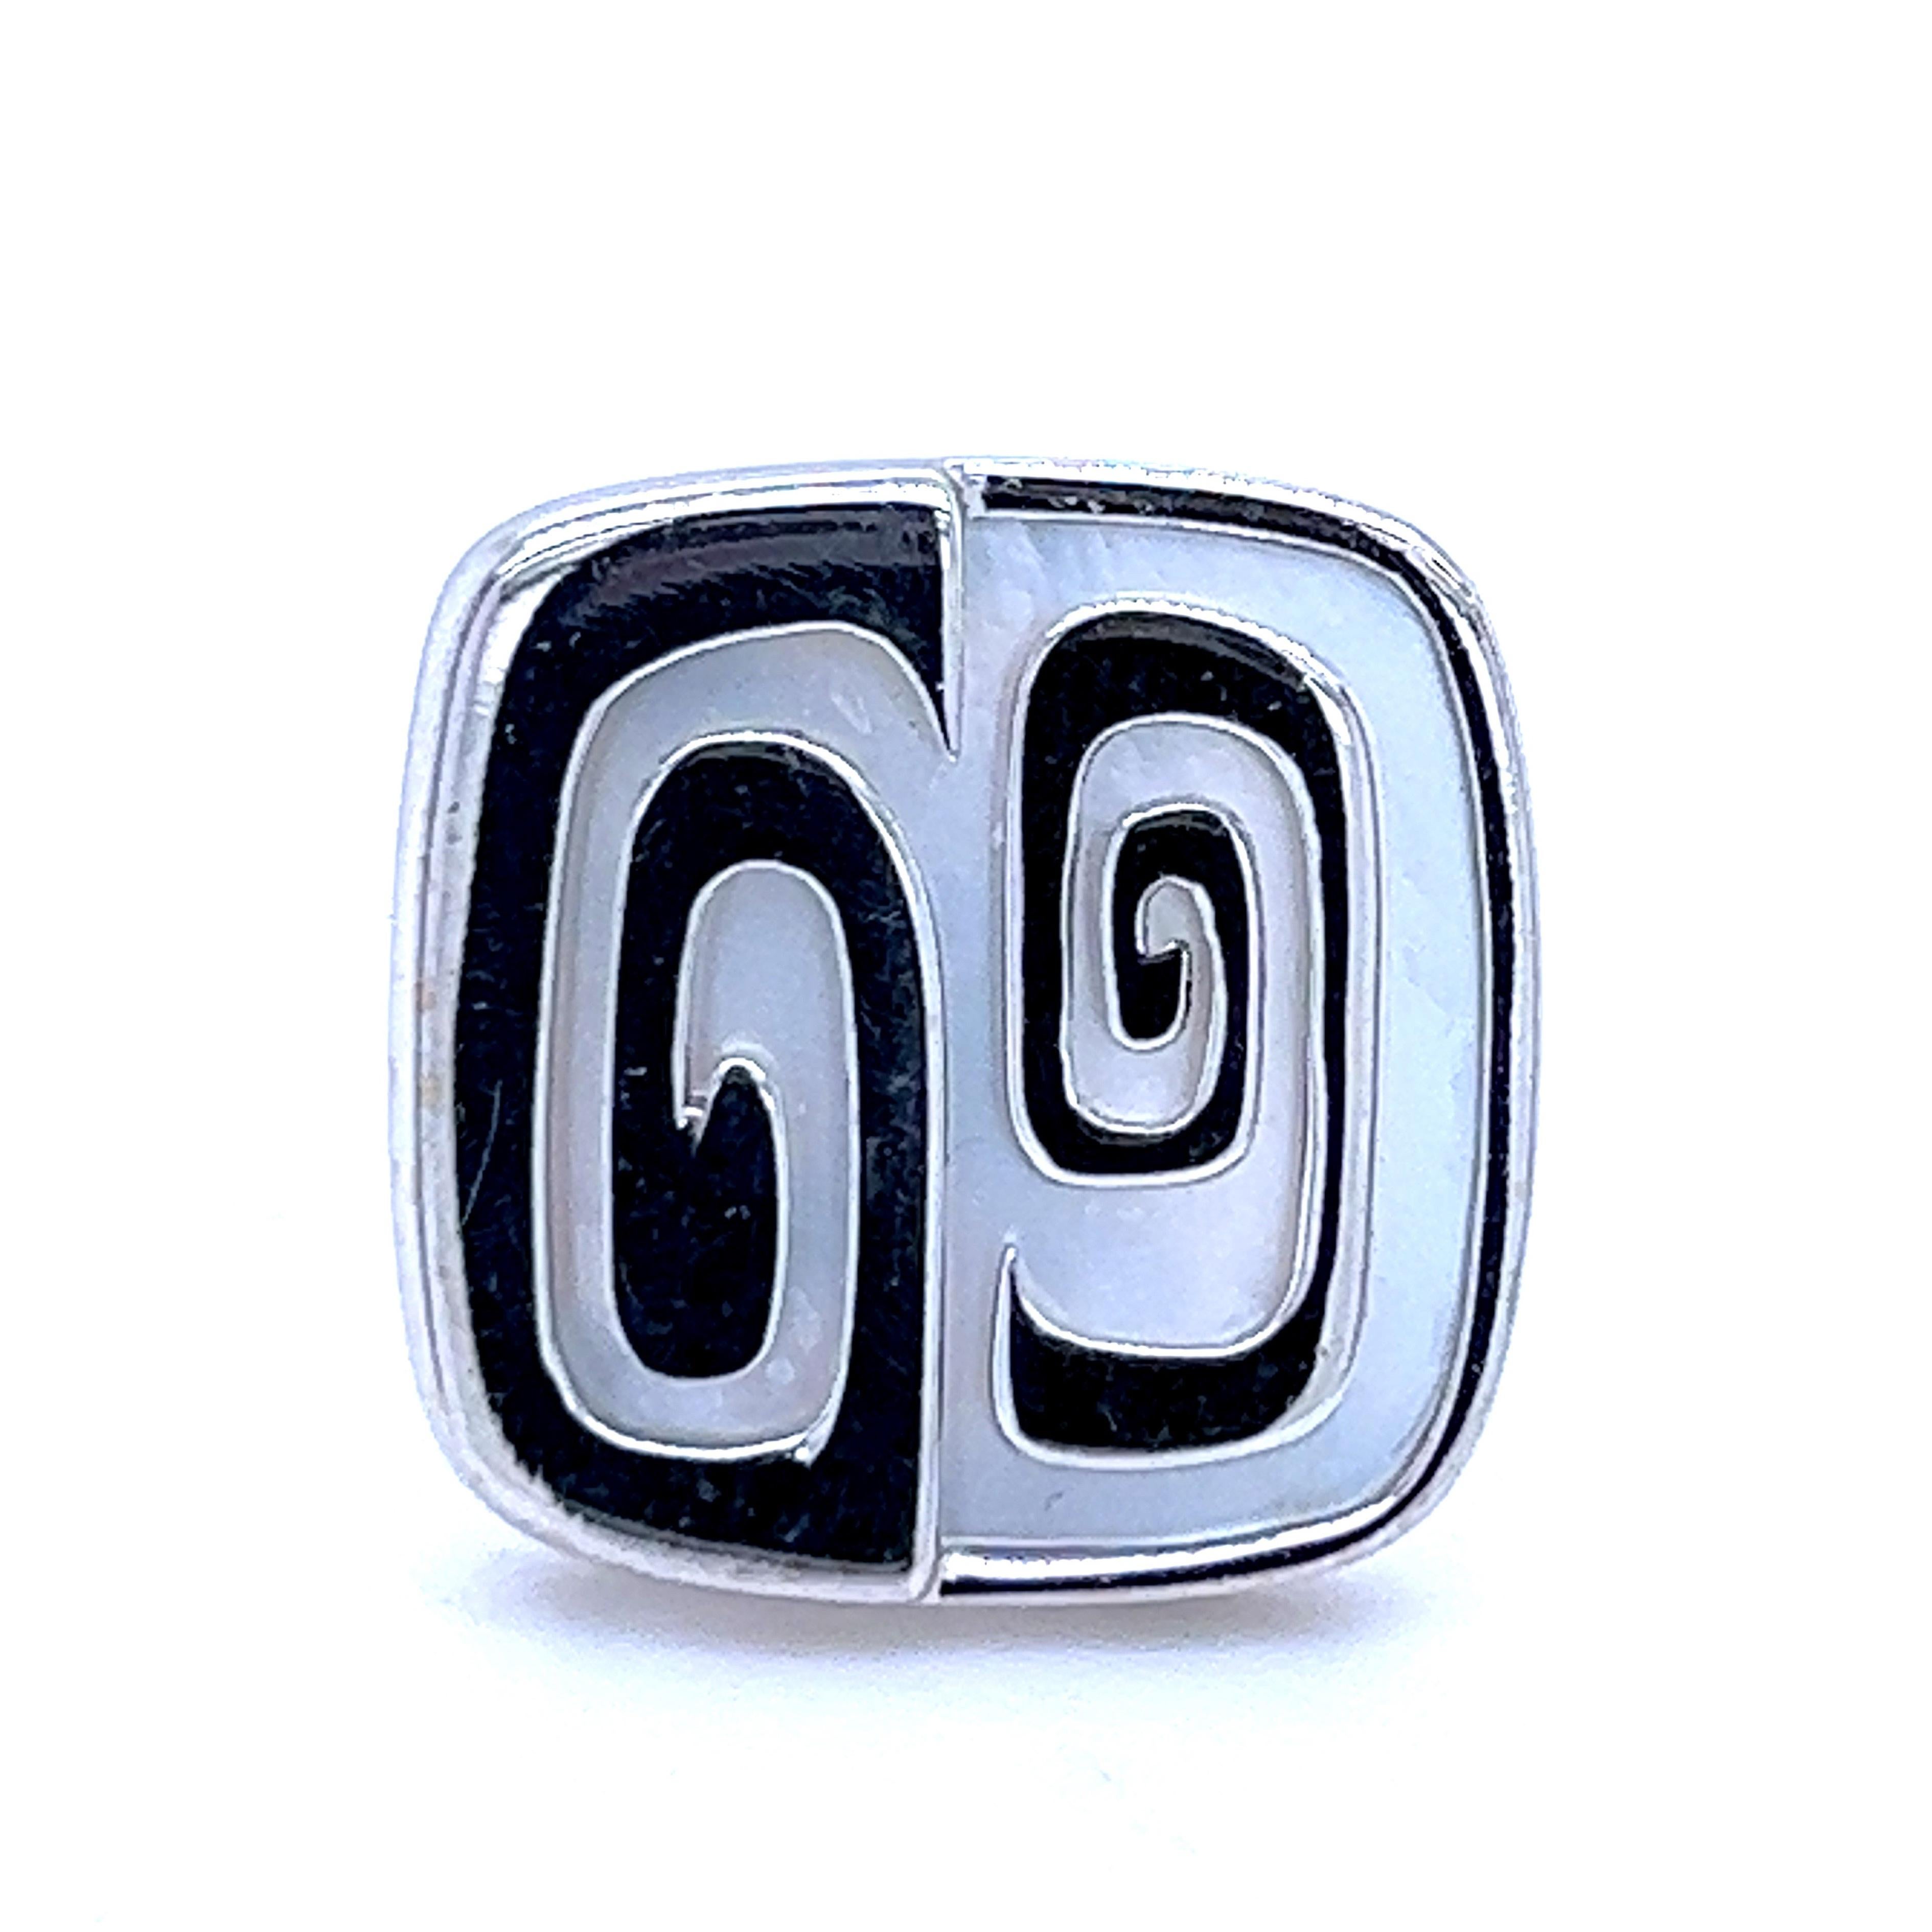 Original 1970's, Extremely Rare Bulgari Limited Edition Cufflinks.
70's amazing decade brought a variety of motifs to Bulgari's design, often inspired, like in this case, by fashion and street style.
The inspiration here is optical, geometrical